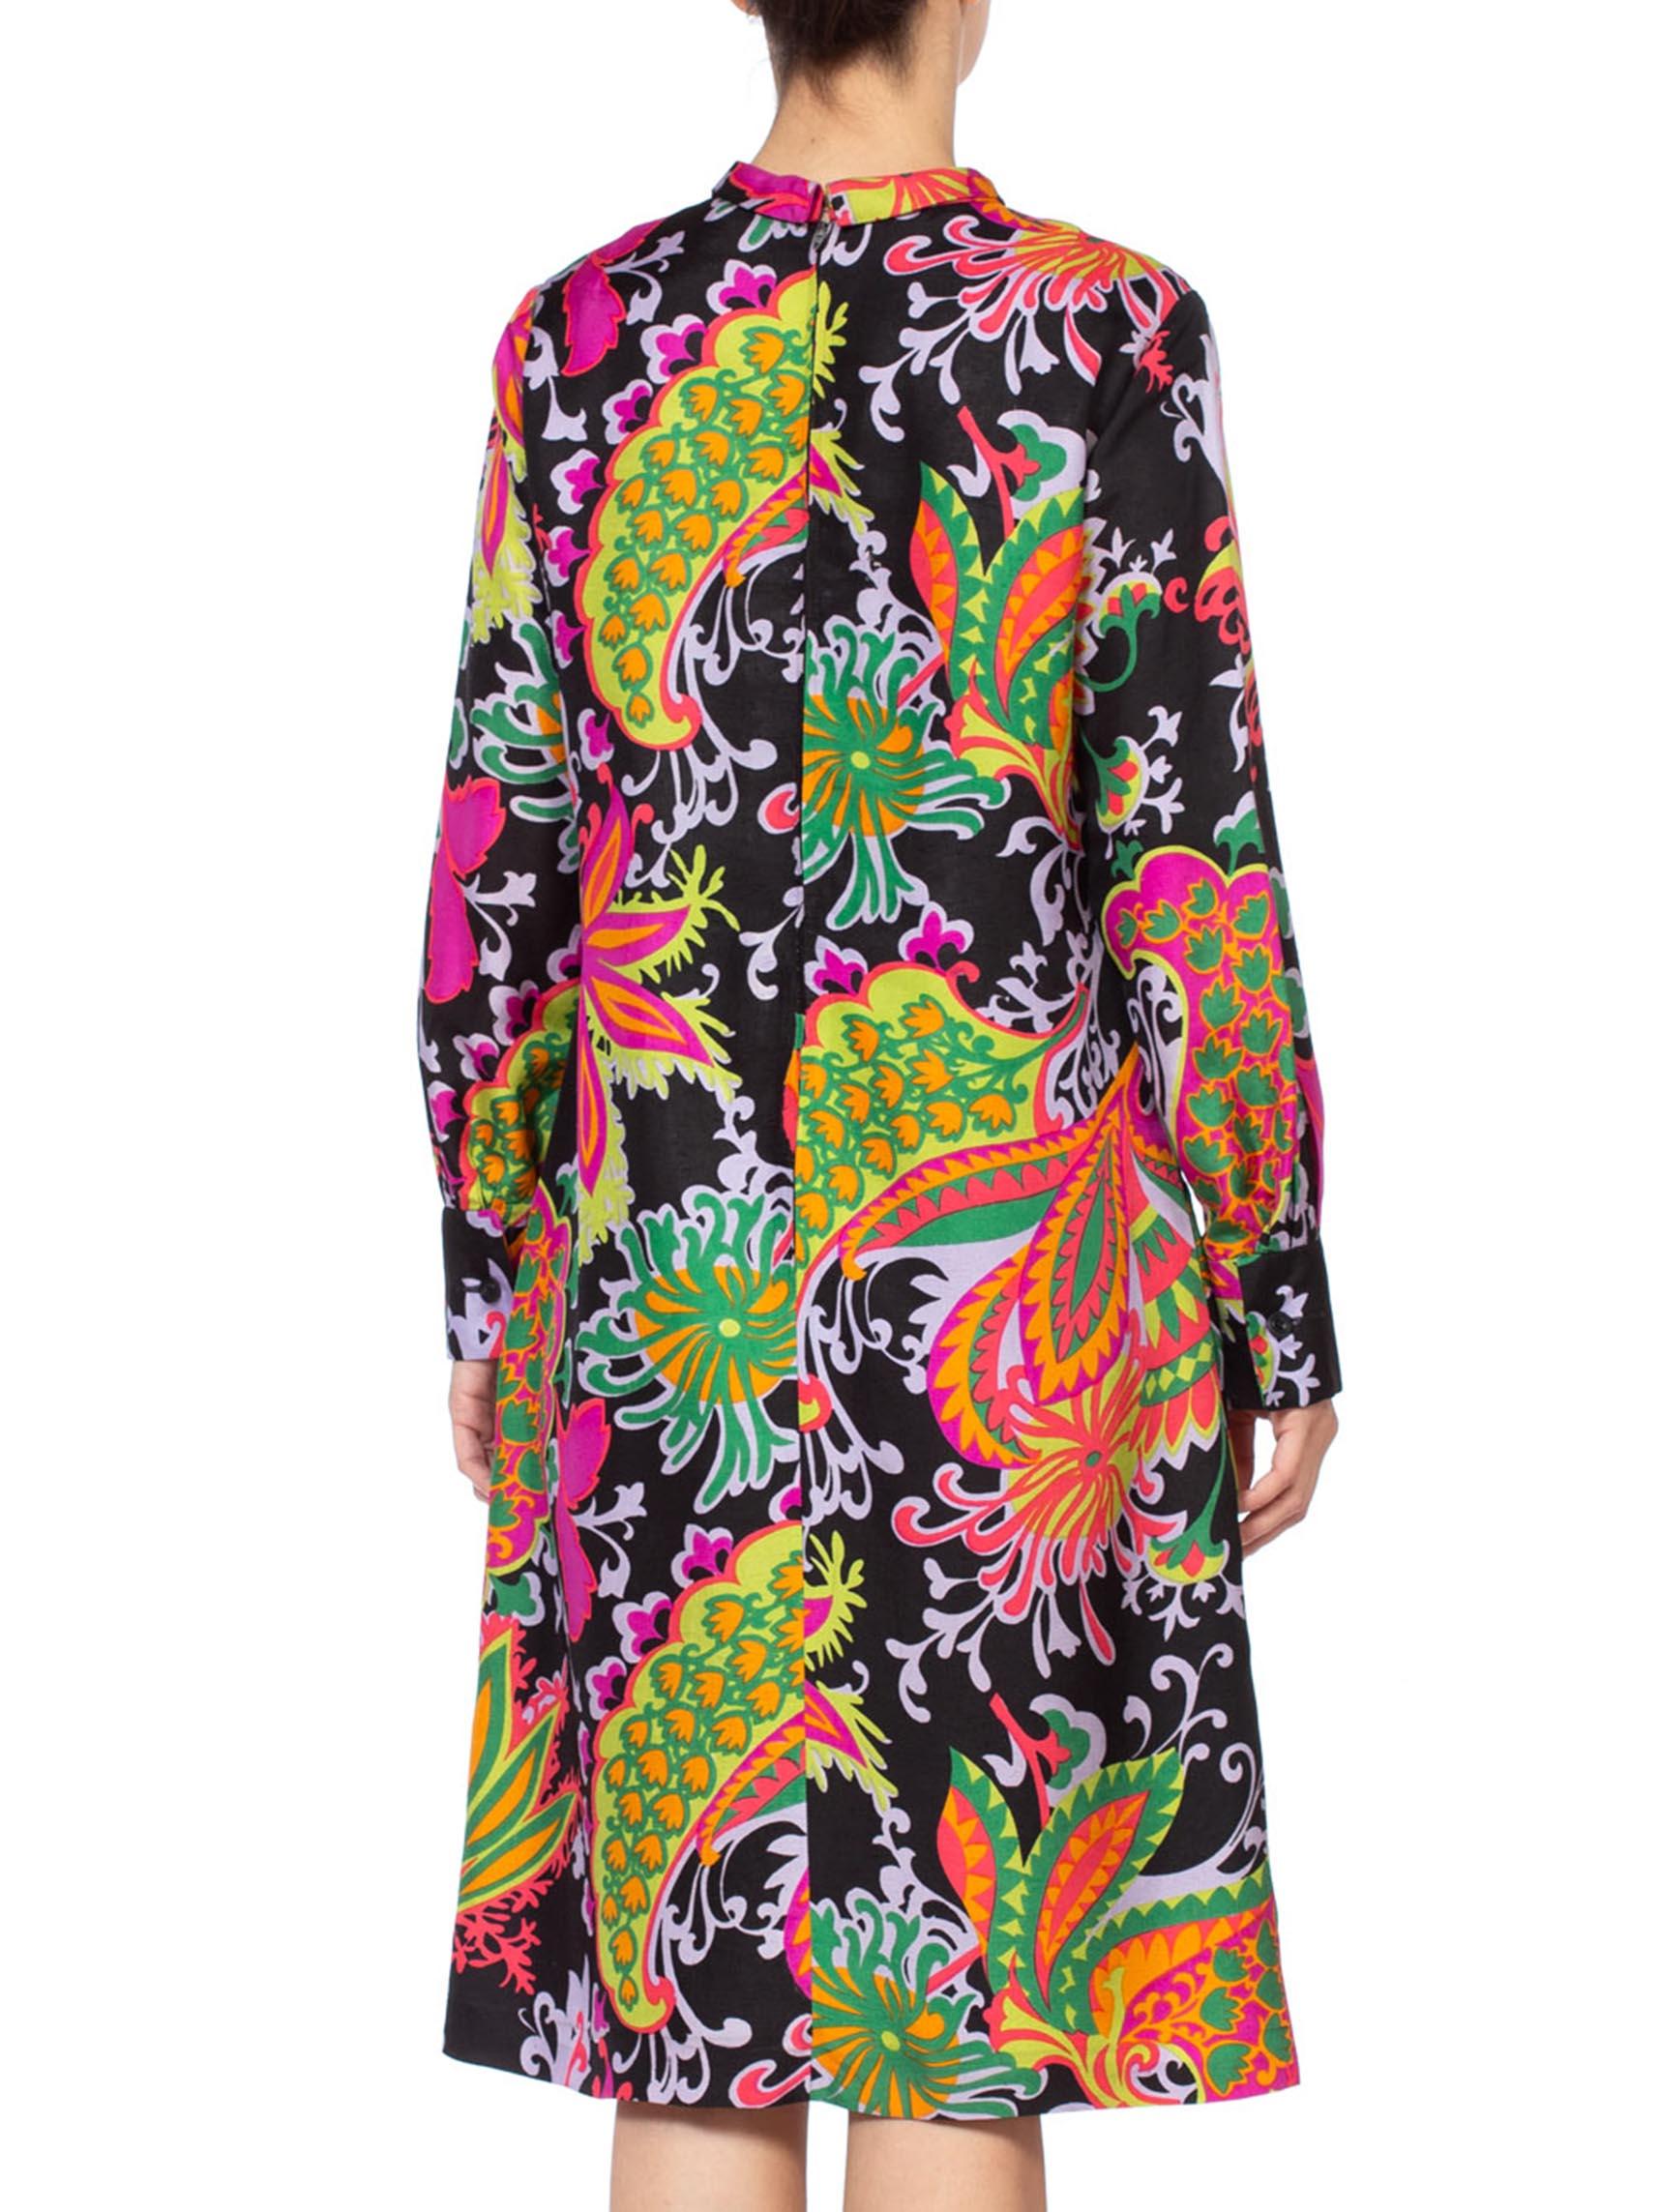 Women's 1960'S 1960/70'S Mod Psychedelic Neon Floral Paisley Dress For Sale